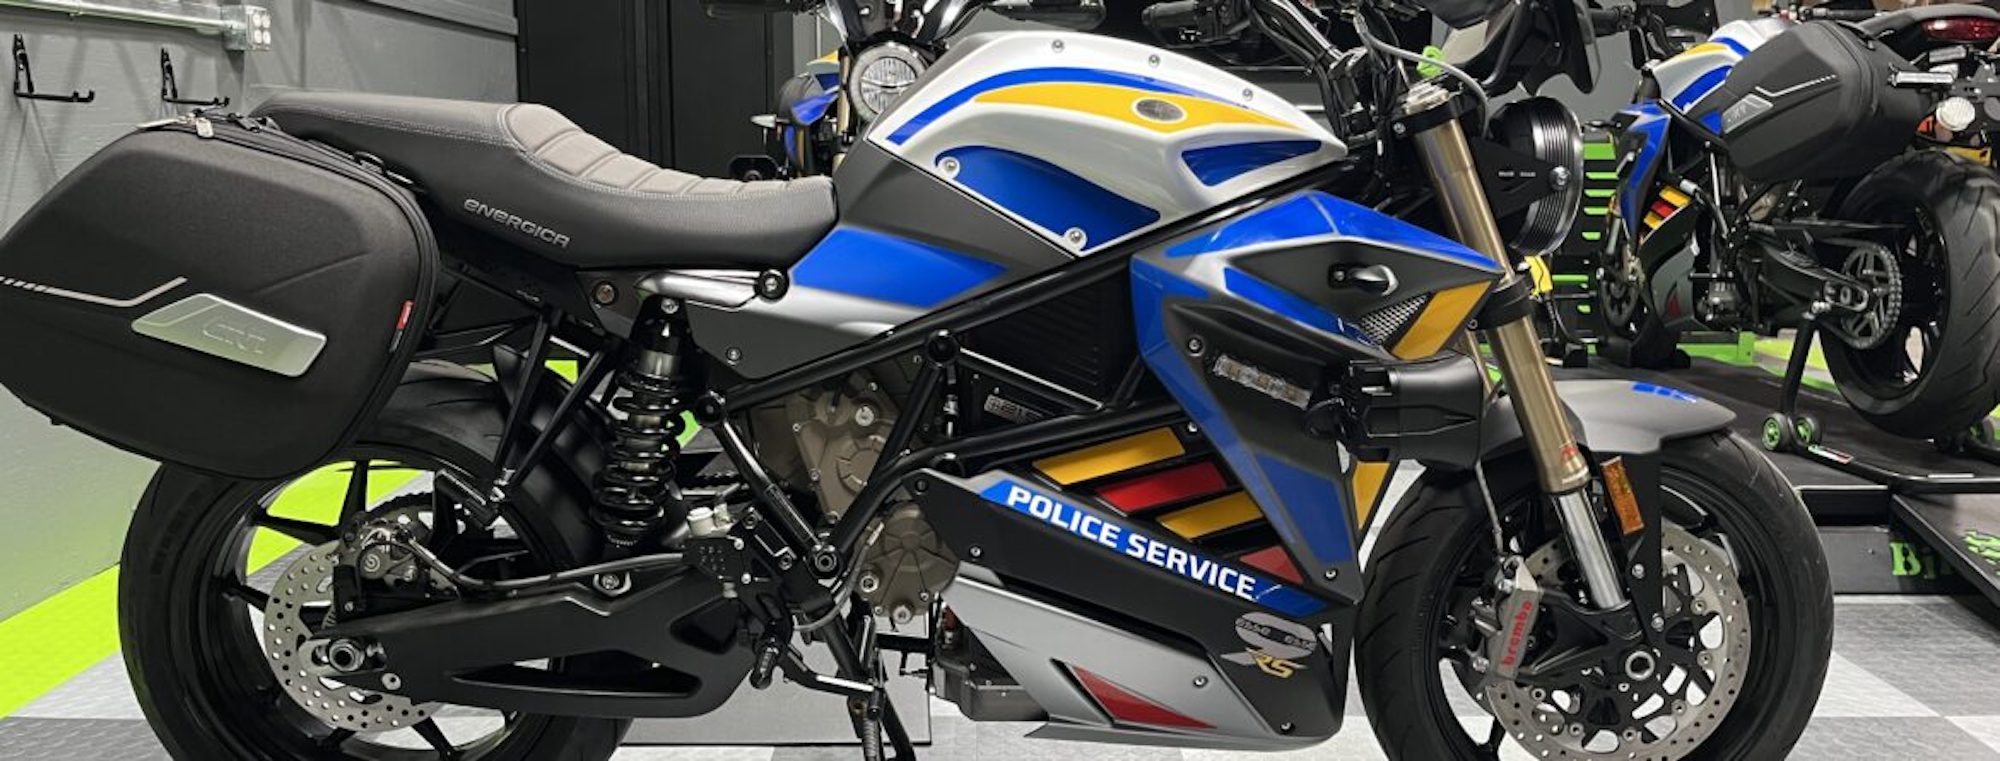 A view of the EsseEsse9+ models provided to the Barbados Police Service. Media sourced from Energica.